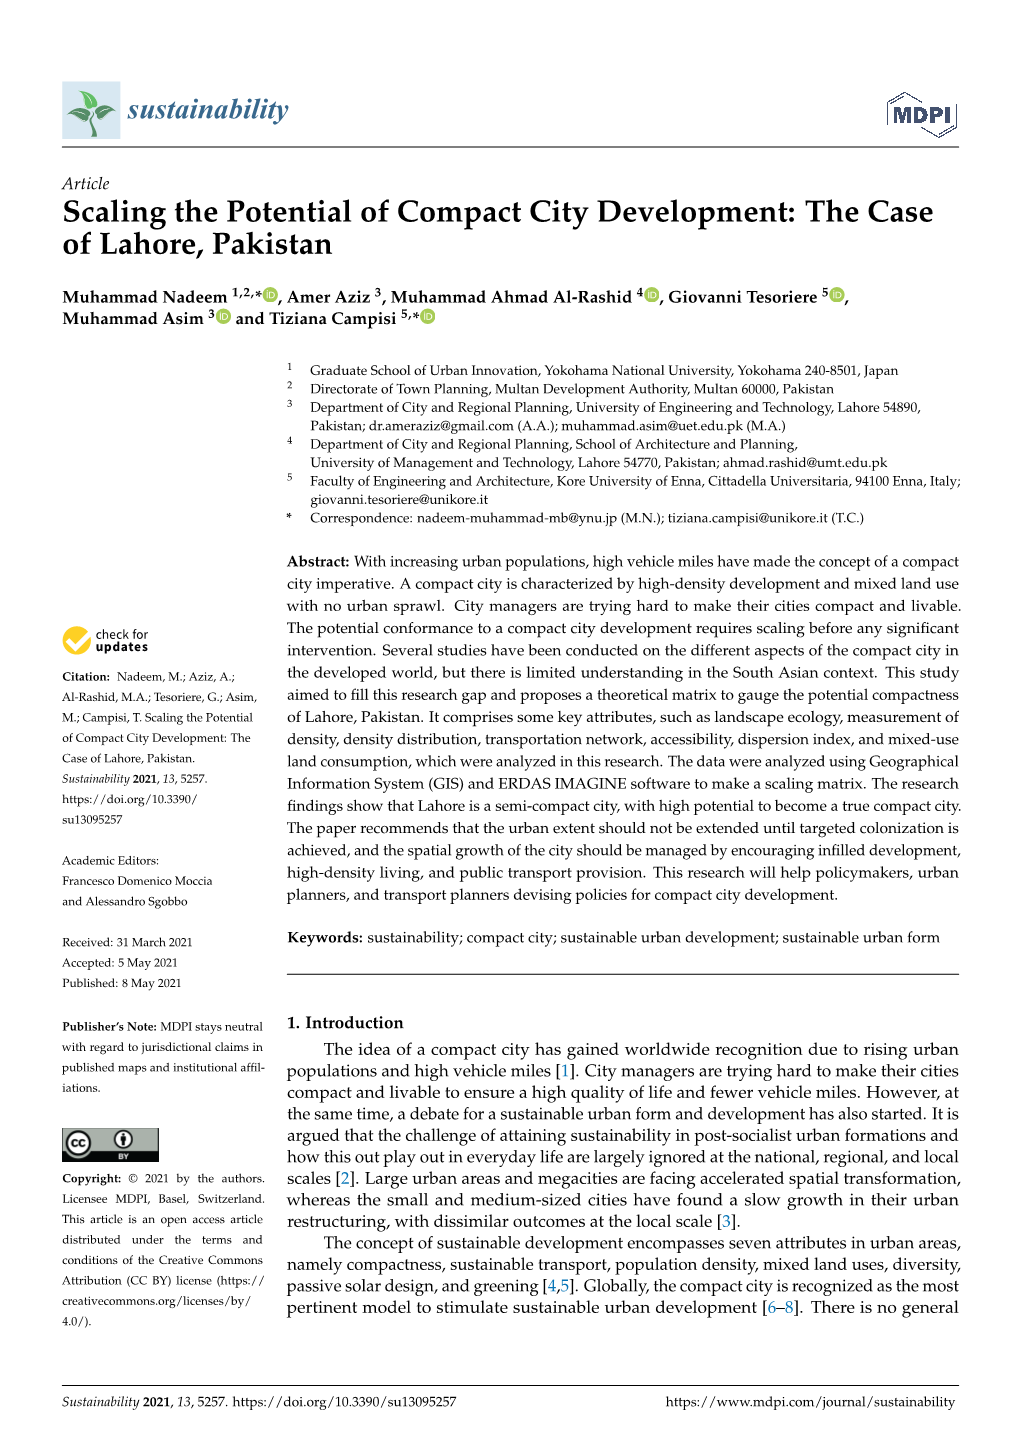 Scaling the Potential of Compact City Development: the Case of Lahore, Pakistan